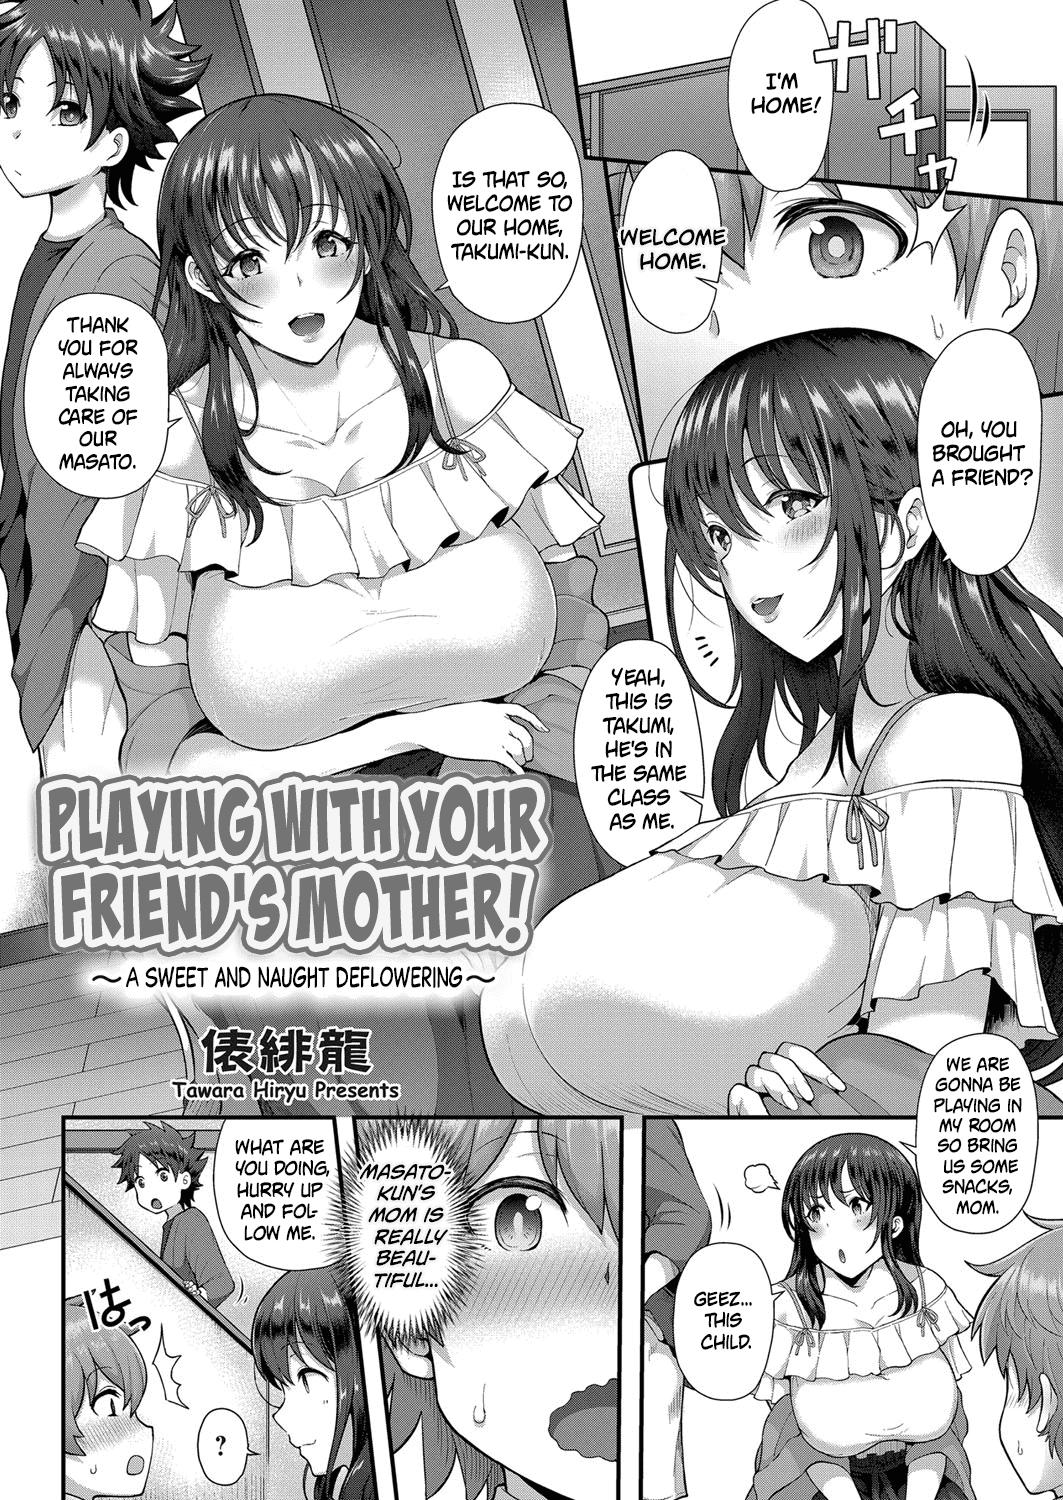 Anale [Tawara Hiryuu] Tomo Haha to Asobo! ~Amakute Ecchi na Fudeoroshi~ | Playing With Your Friend's Mother! ~A Sweet and Naught Deflowering~ (COMIC Grape Vol. 68) [English] [At4r1] Pink Pussy - Page 2